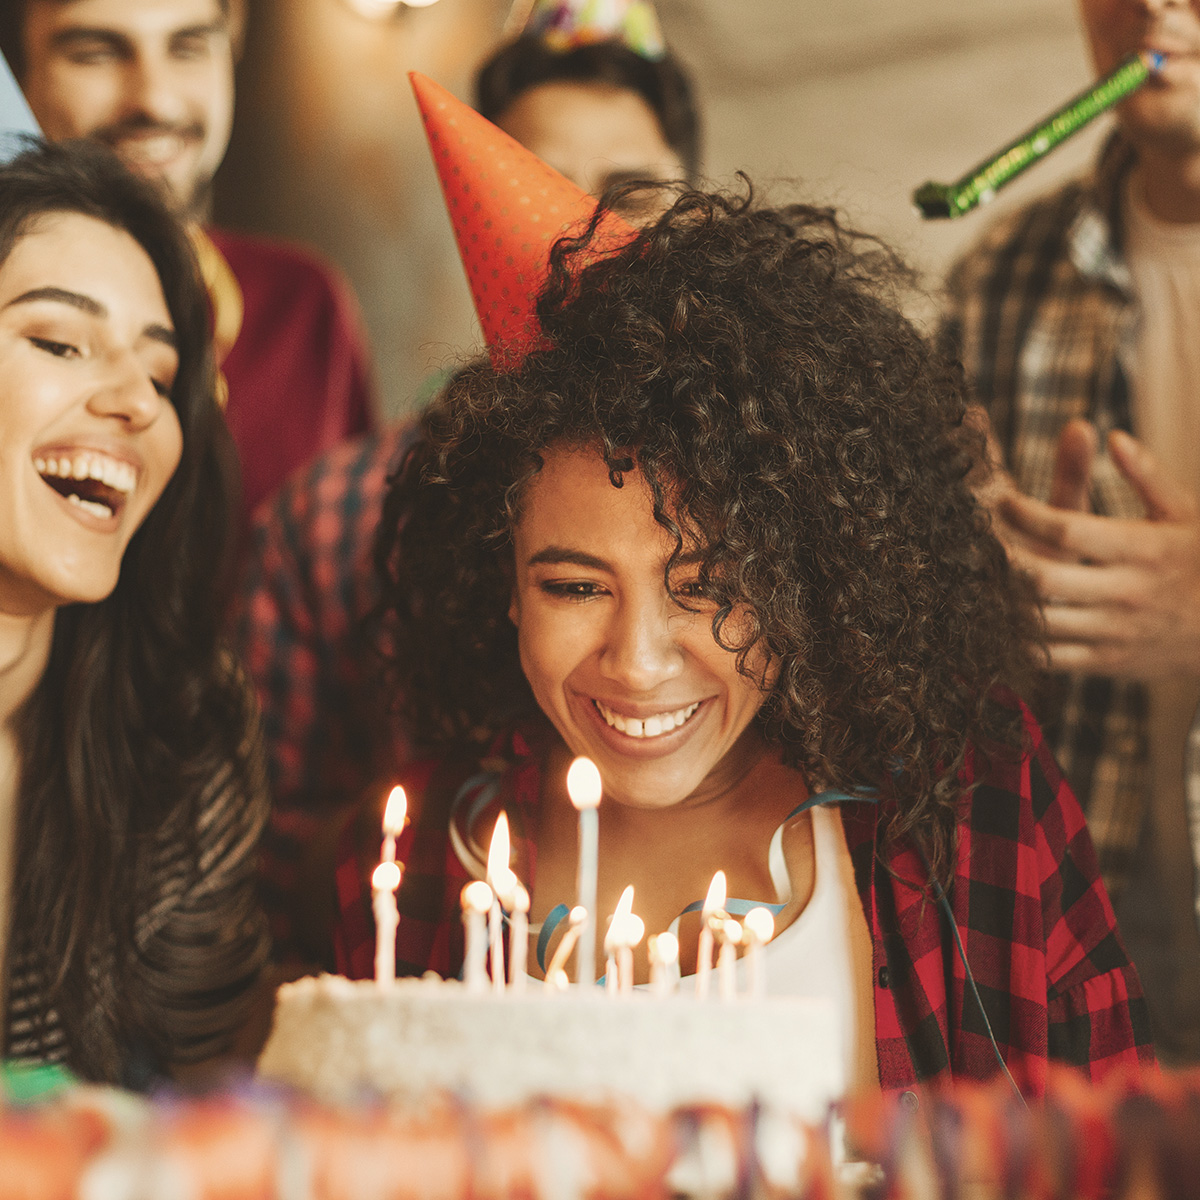 A group of diverse young adults gather around an African American young woman who is about to blow out the candles on her birthday cake